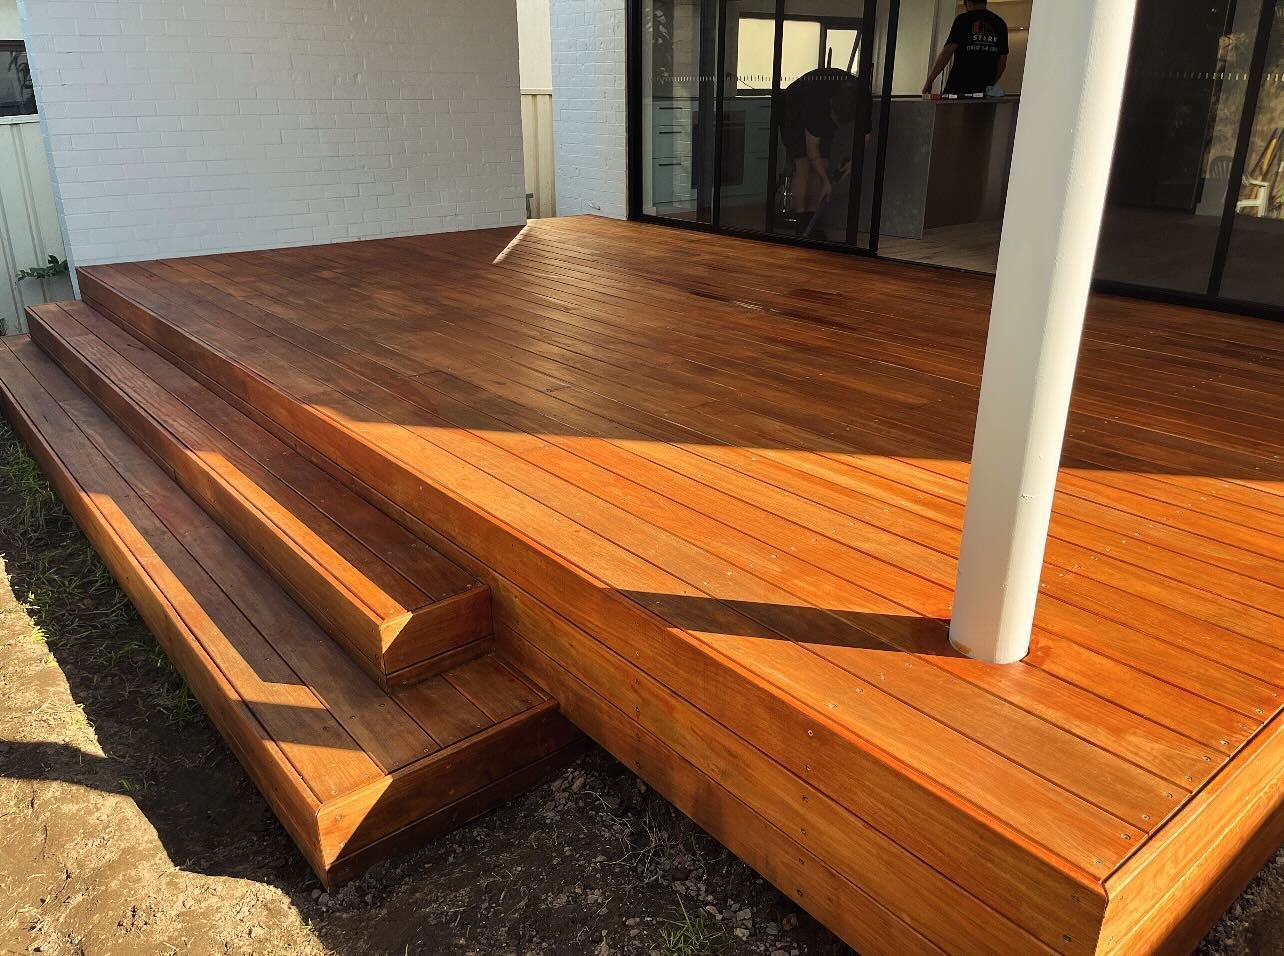 The finished product of this spotted gum deck we laid recently for one of our clients in Canterbury.